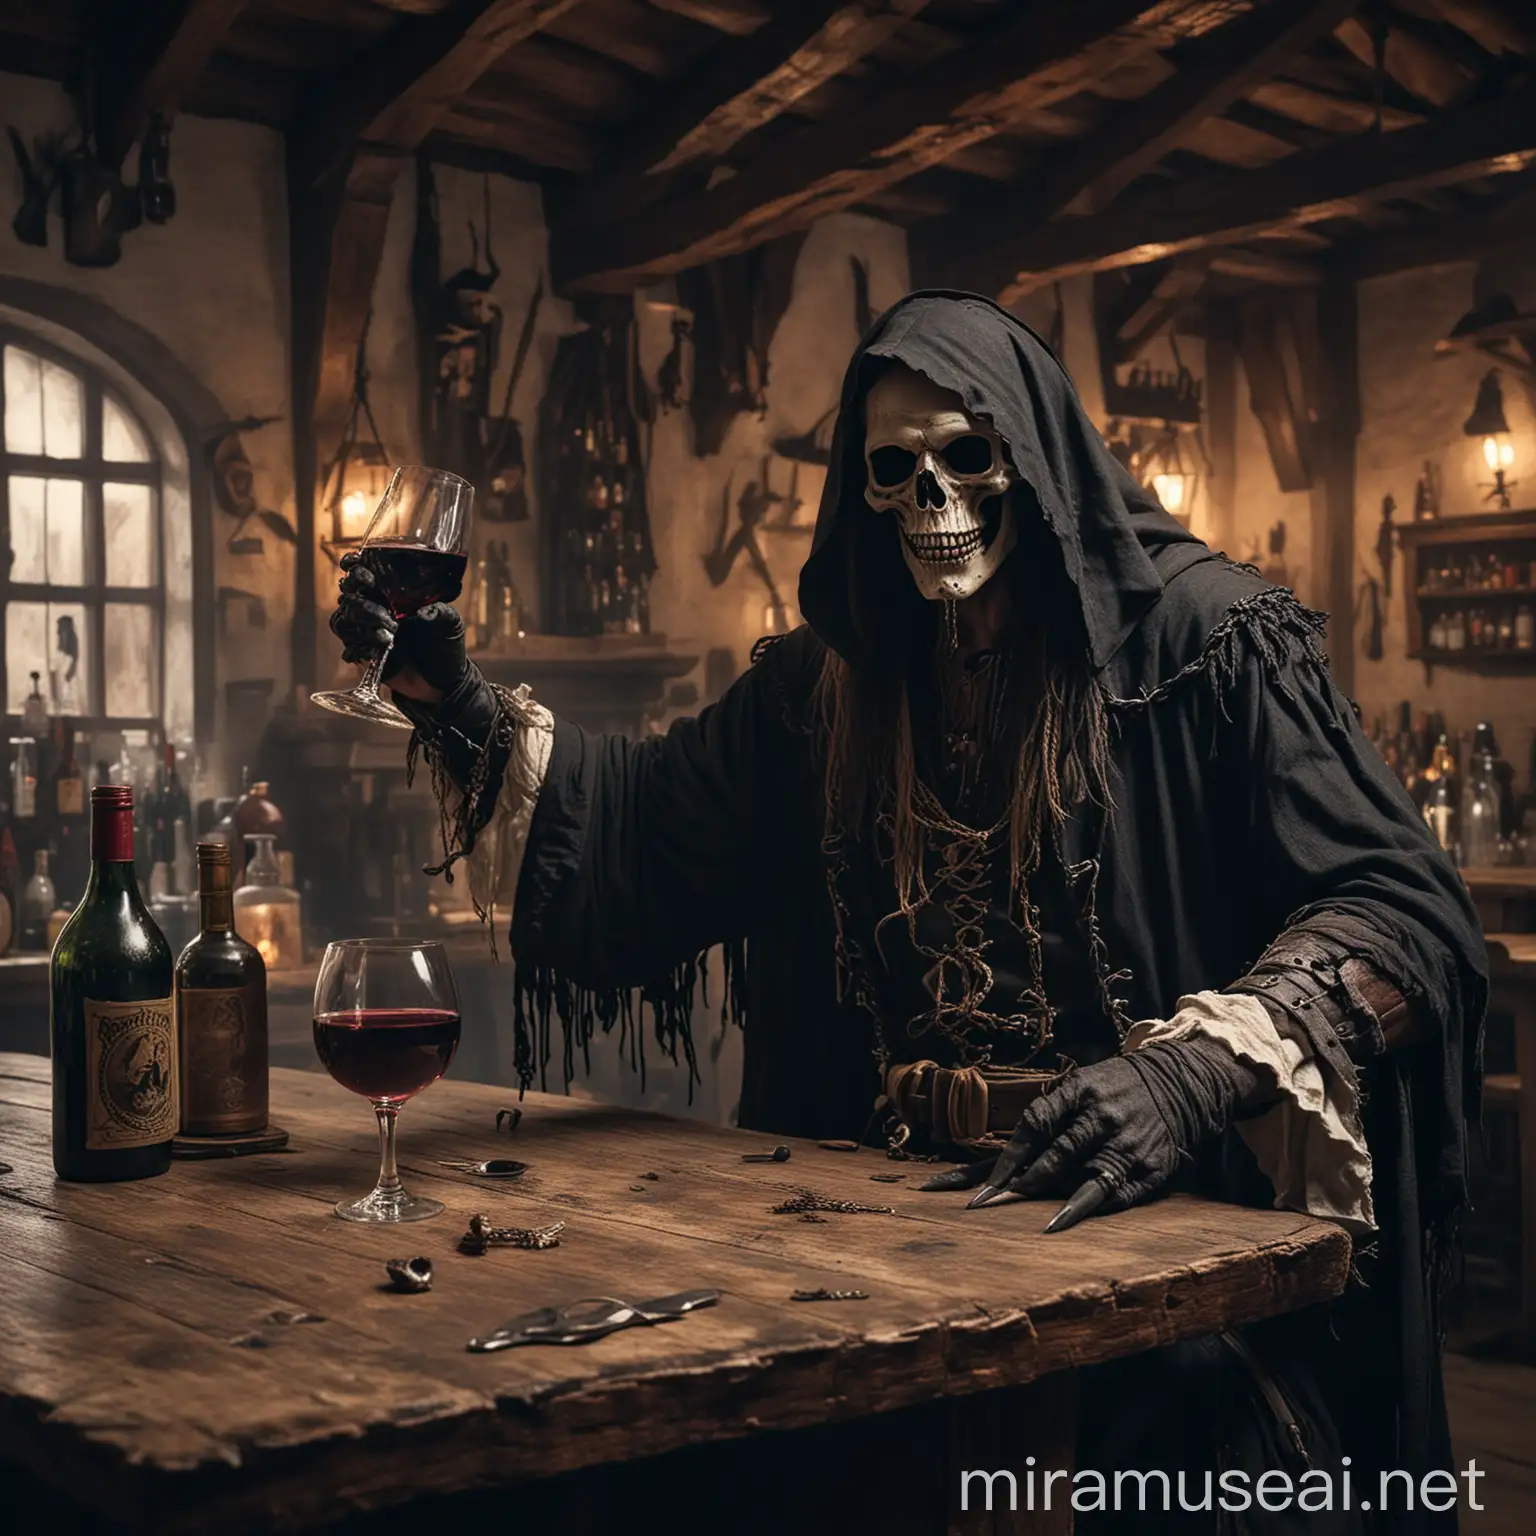 Medieval Tavern Scene with Grim Reaper and Pirate Drinking Wine